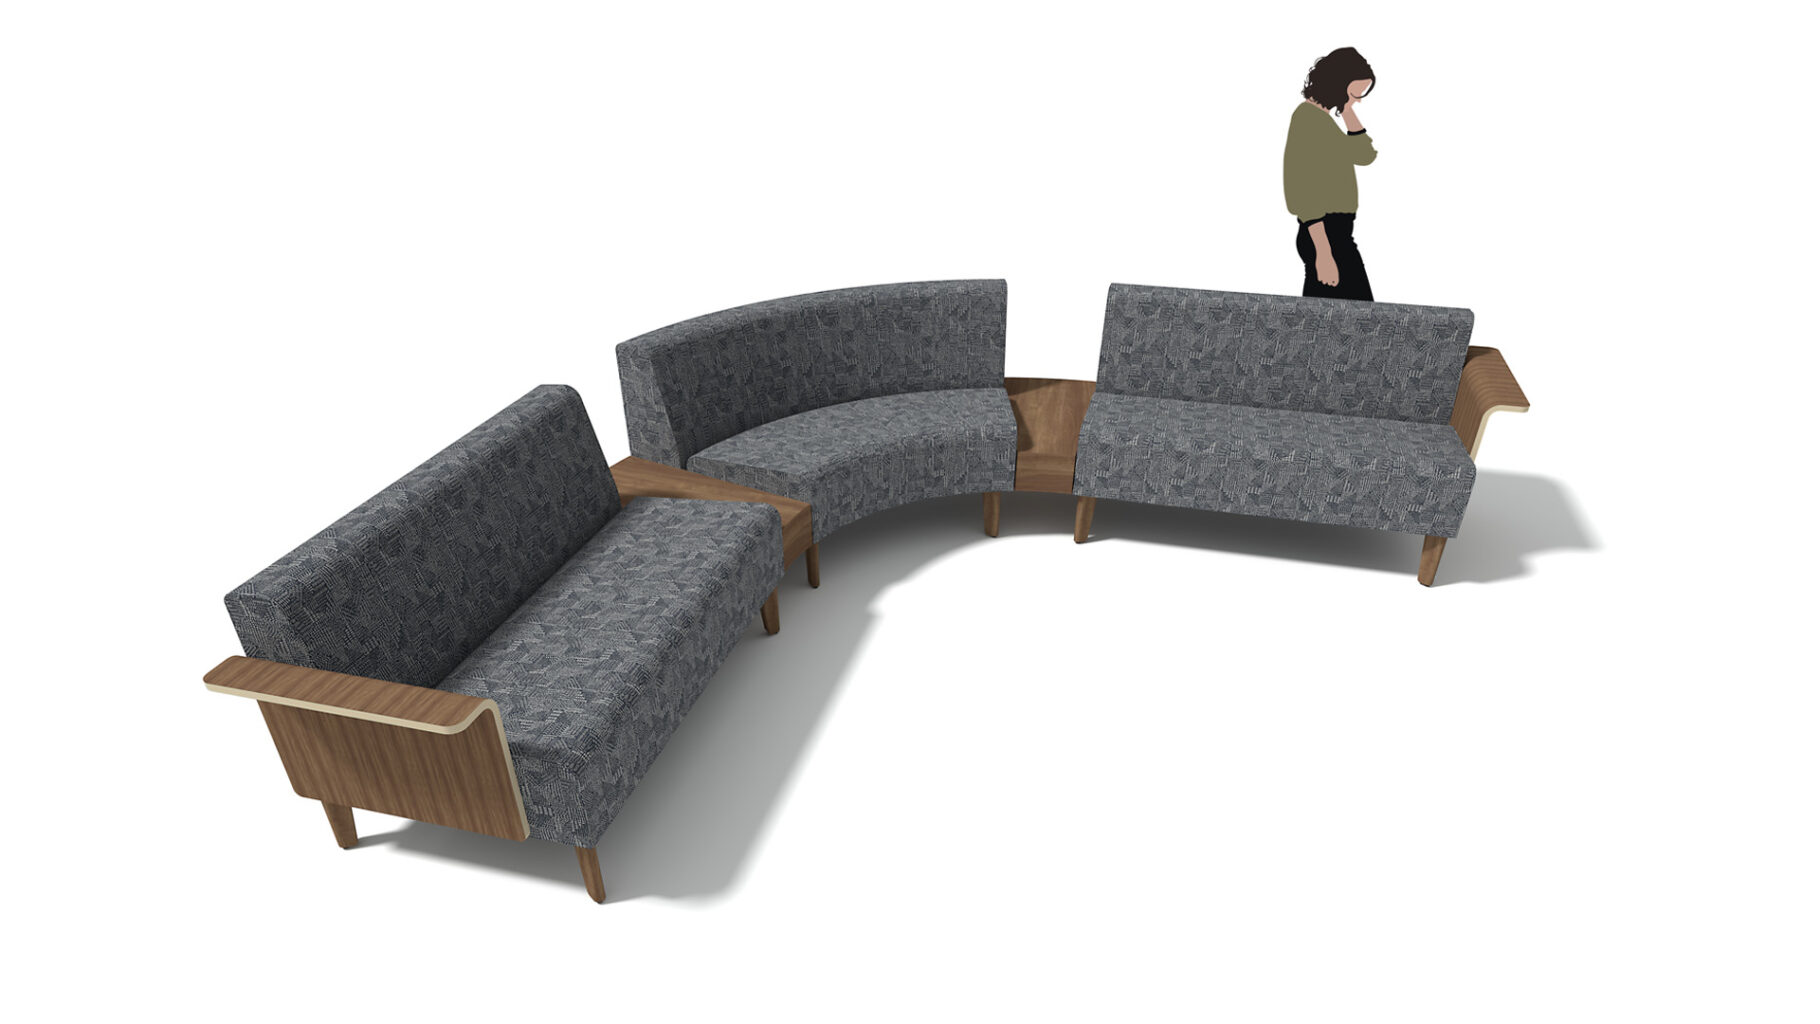 Concept D - configuration of an Avila sofa with left arm facing molded wood arm, narrow wedge table, inside quarter, narrow wedge table and sofa with right arm facing molded wood arm.